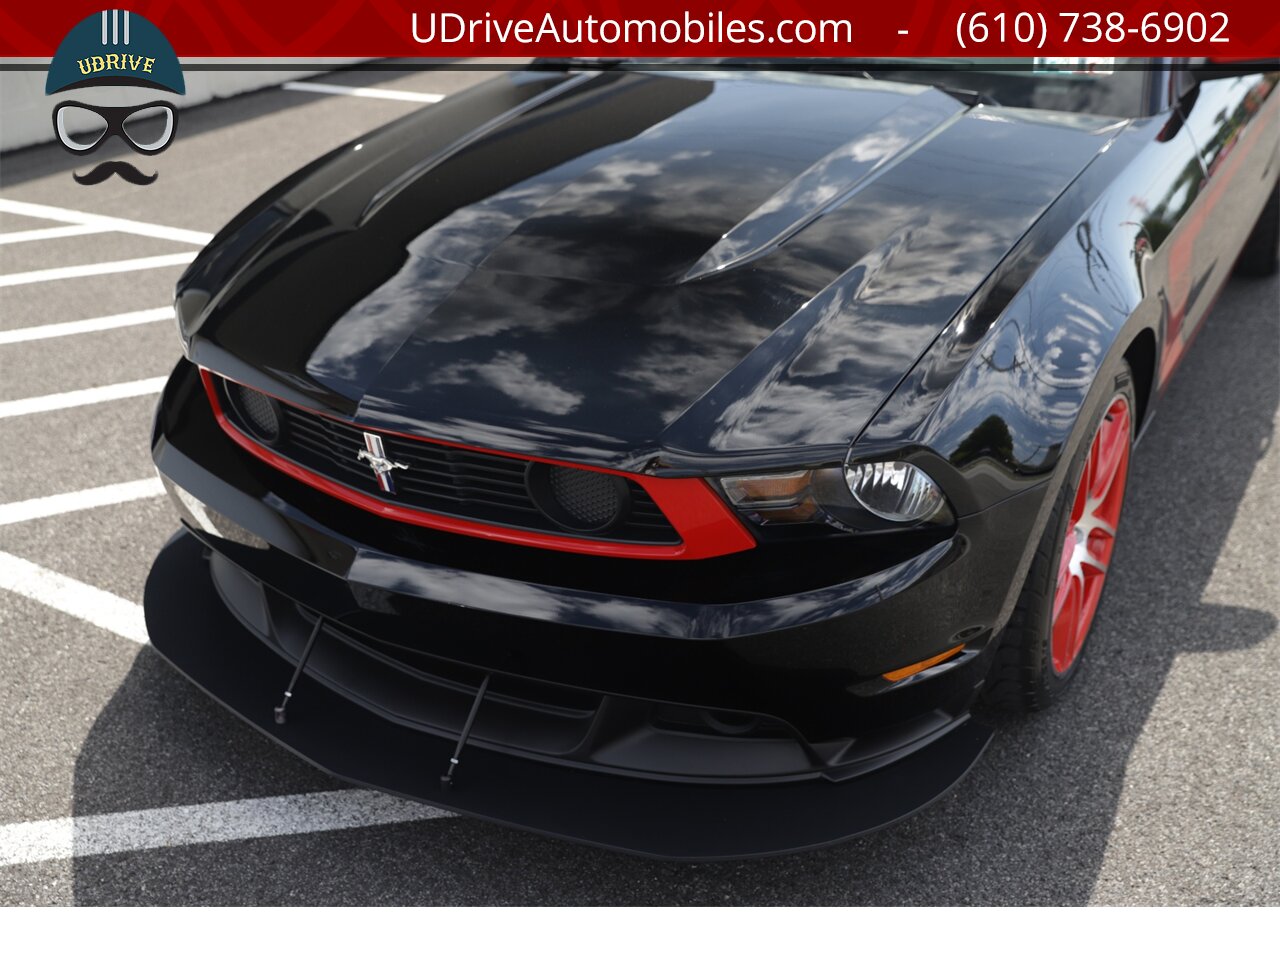 2012 Ford Mustang 866 Miles Boss 302 Laguna Seca #338 of 750  Red TracKey Activated - Photo 9 - West Chester, PA 19382